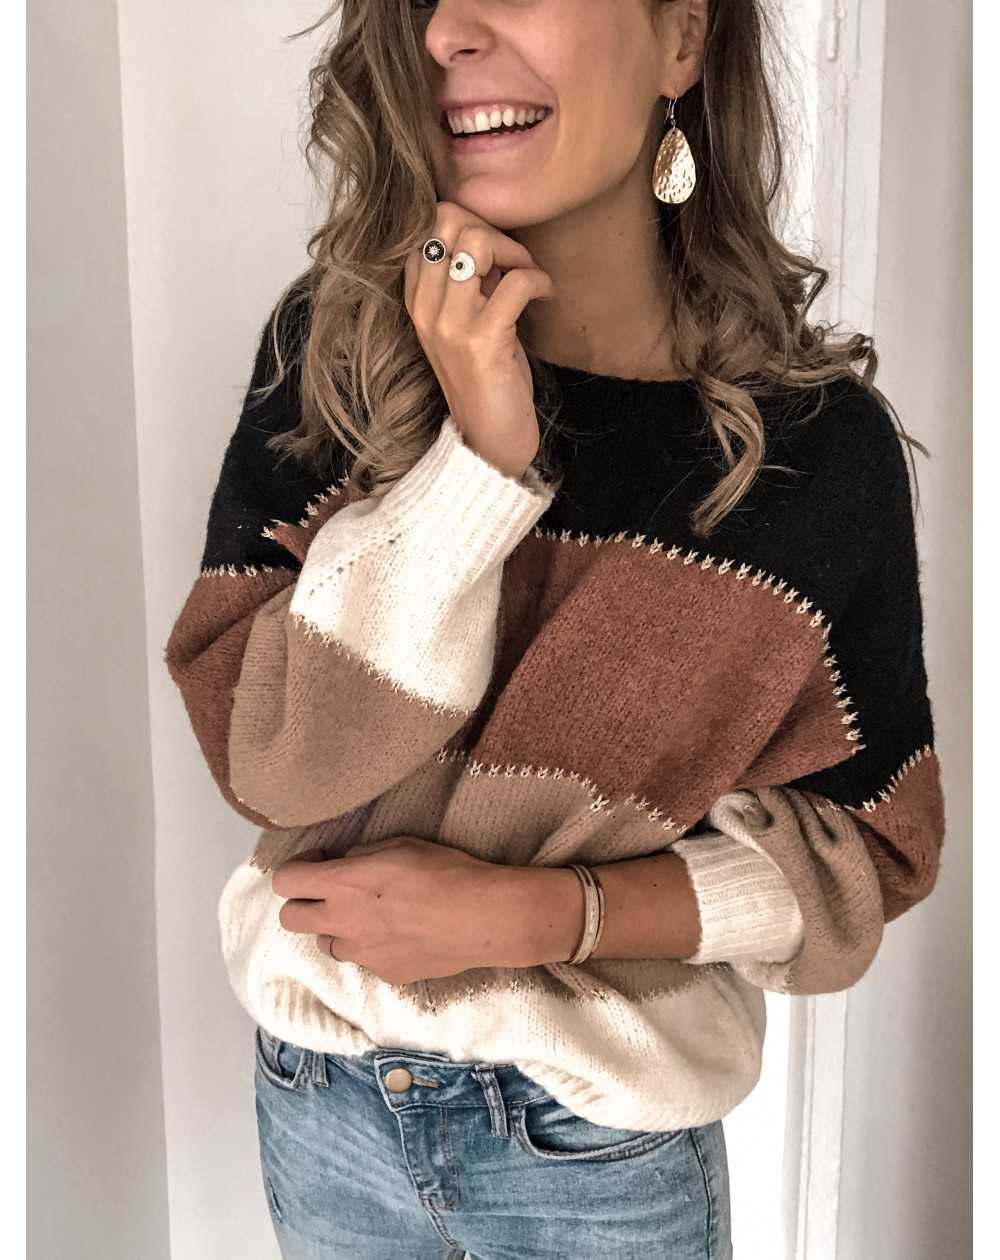 Oversized Comfy Cute Striped Fall Pullover Sweaters For women